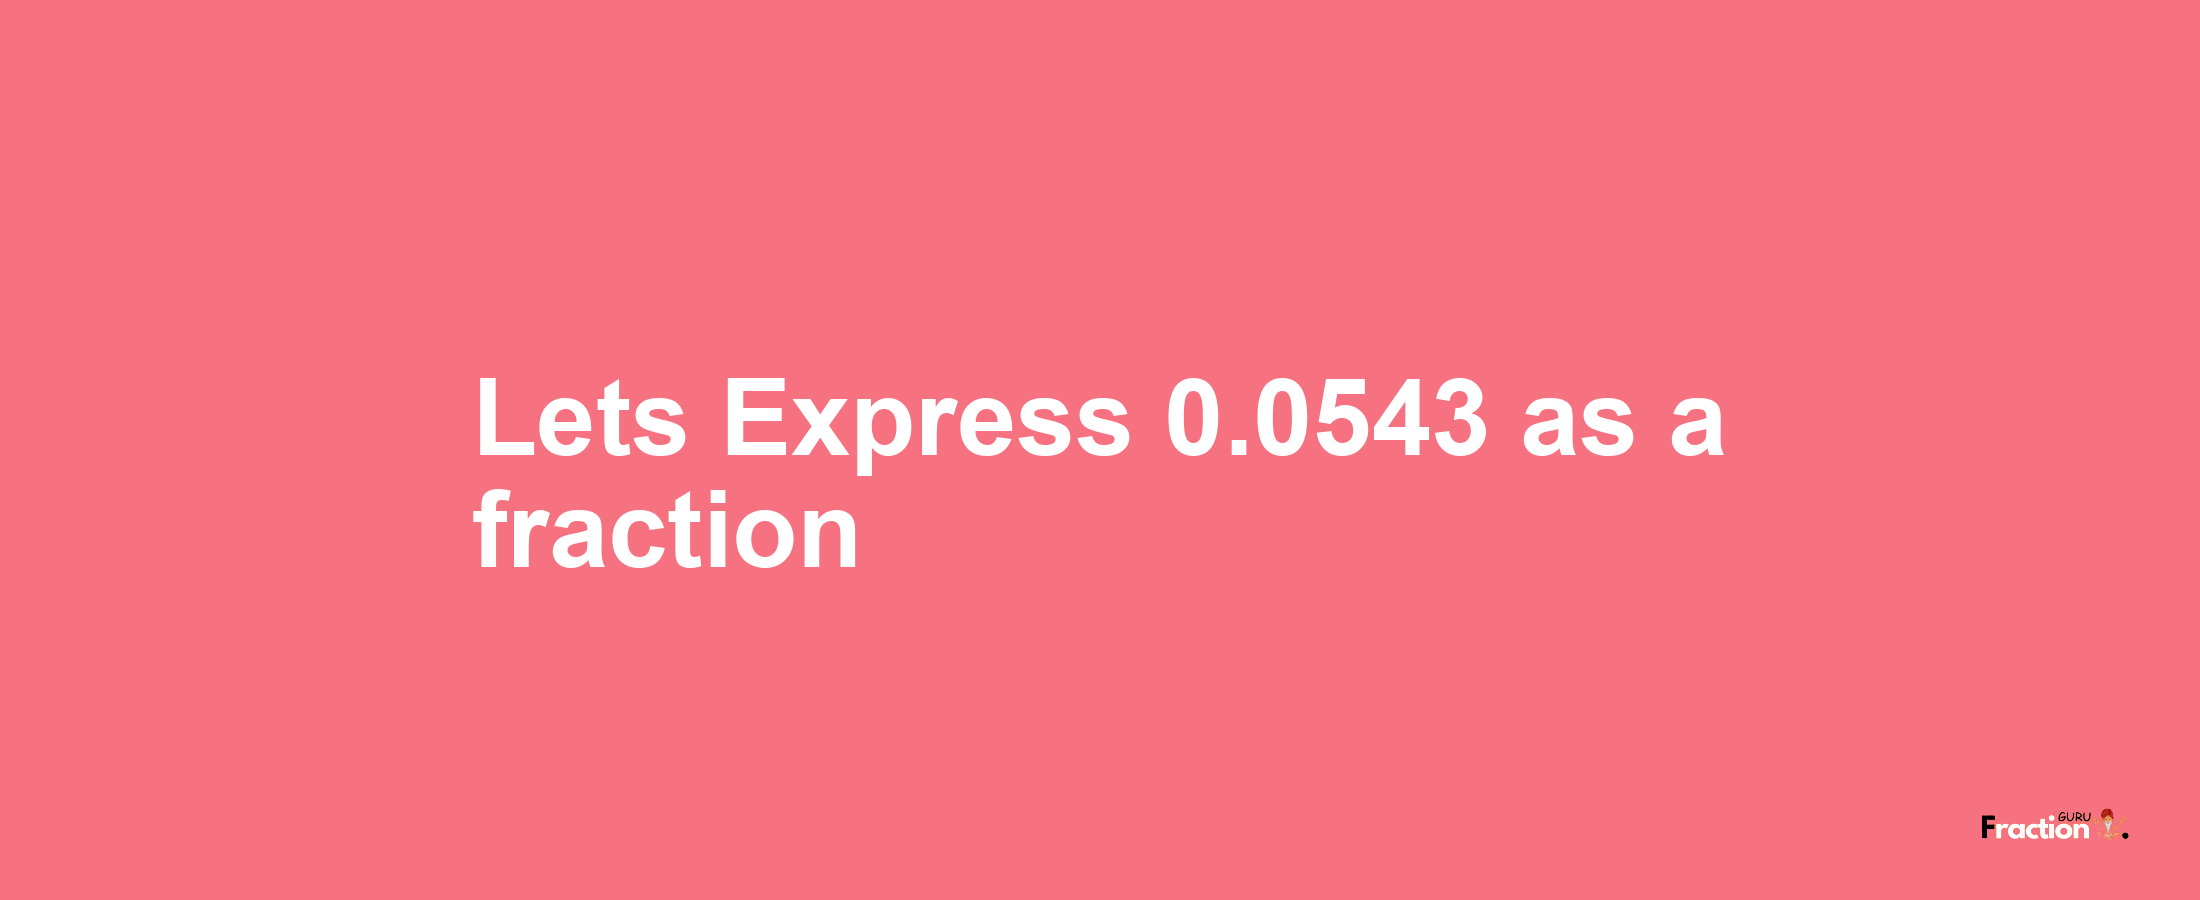 Lets Express 0.0543 as afraction